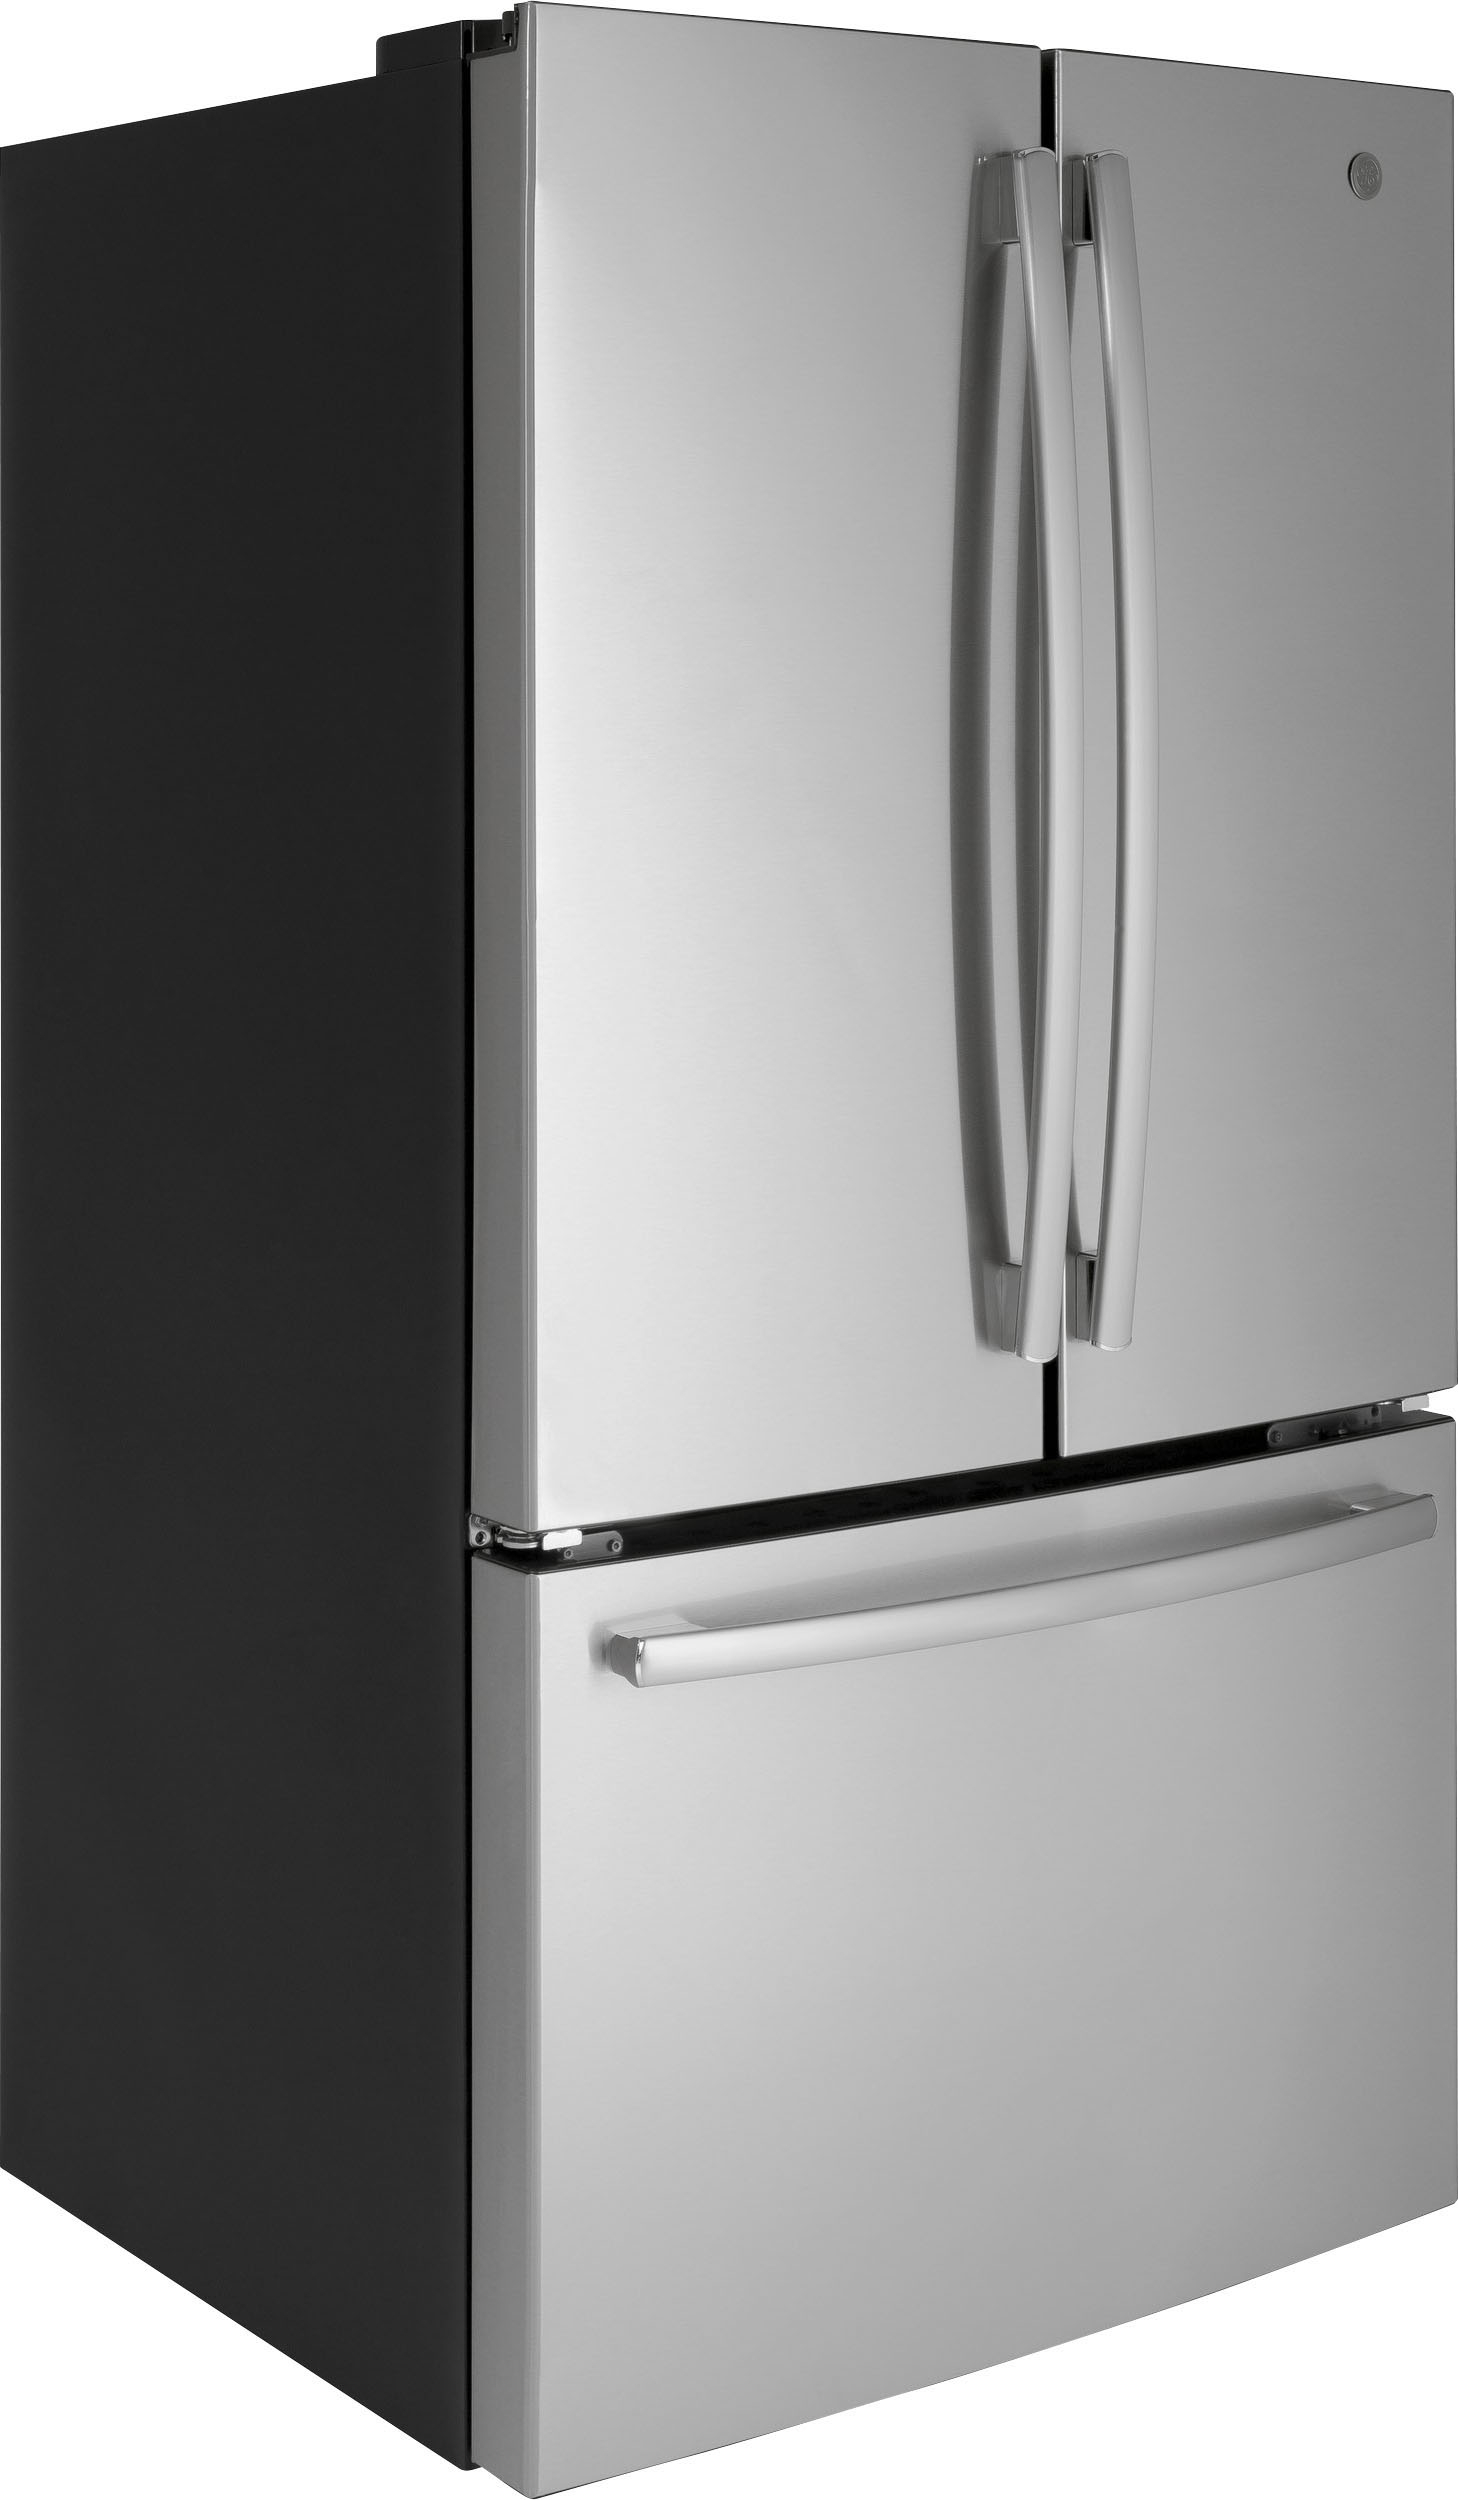 Angle View: GE Profile - 22.1 Cu. Ft. French Door-in-Door Counter-Depth Refrigerator with Hands-Free AutoFill - Fingerprint resistant black stainless